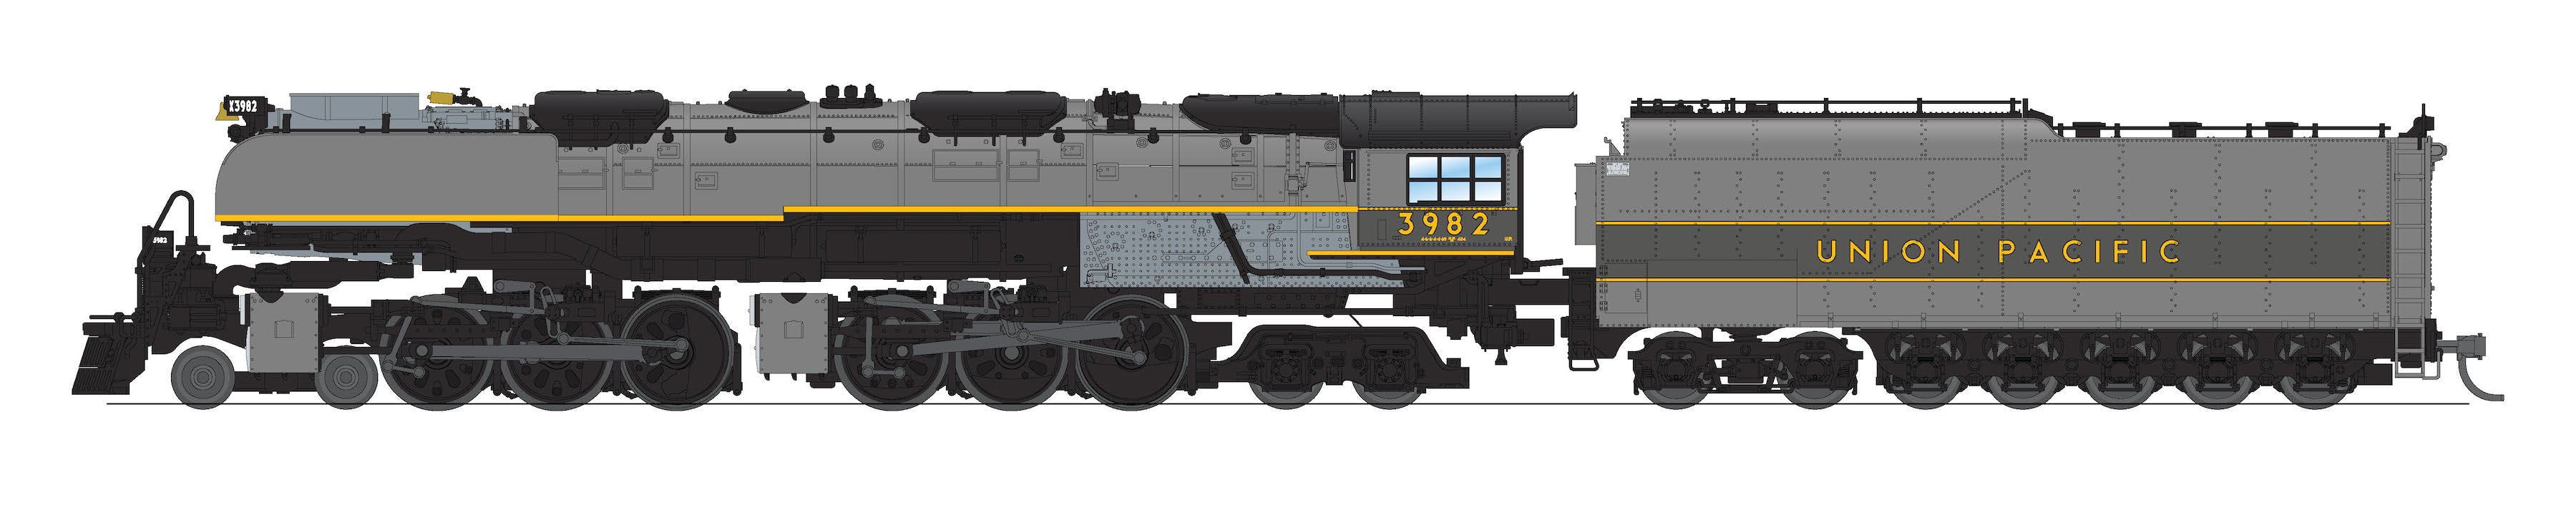 6984 UP Challenger 4-6-6-4, #3982, Two-tone Gray, Oil Tender, w/ wind wings, Paragon4 Sound/DC/DCC, Smoke, N